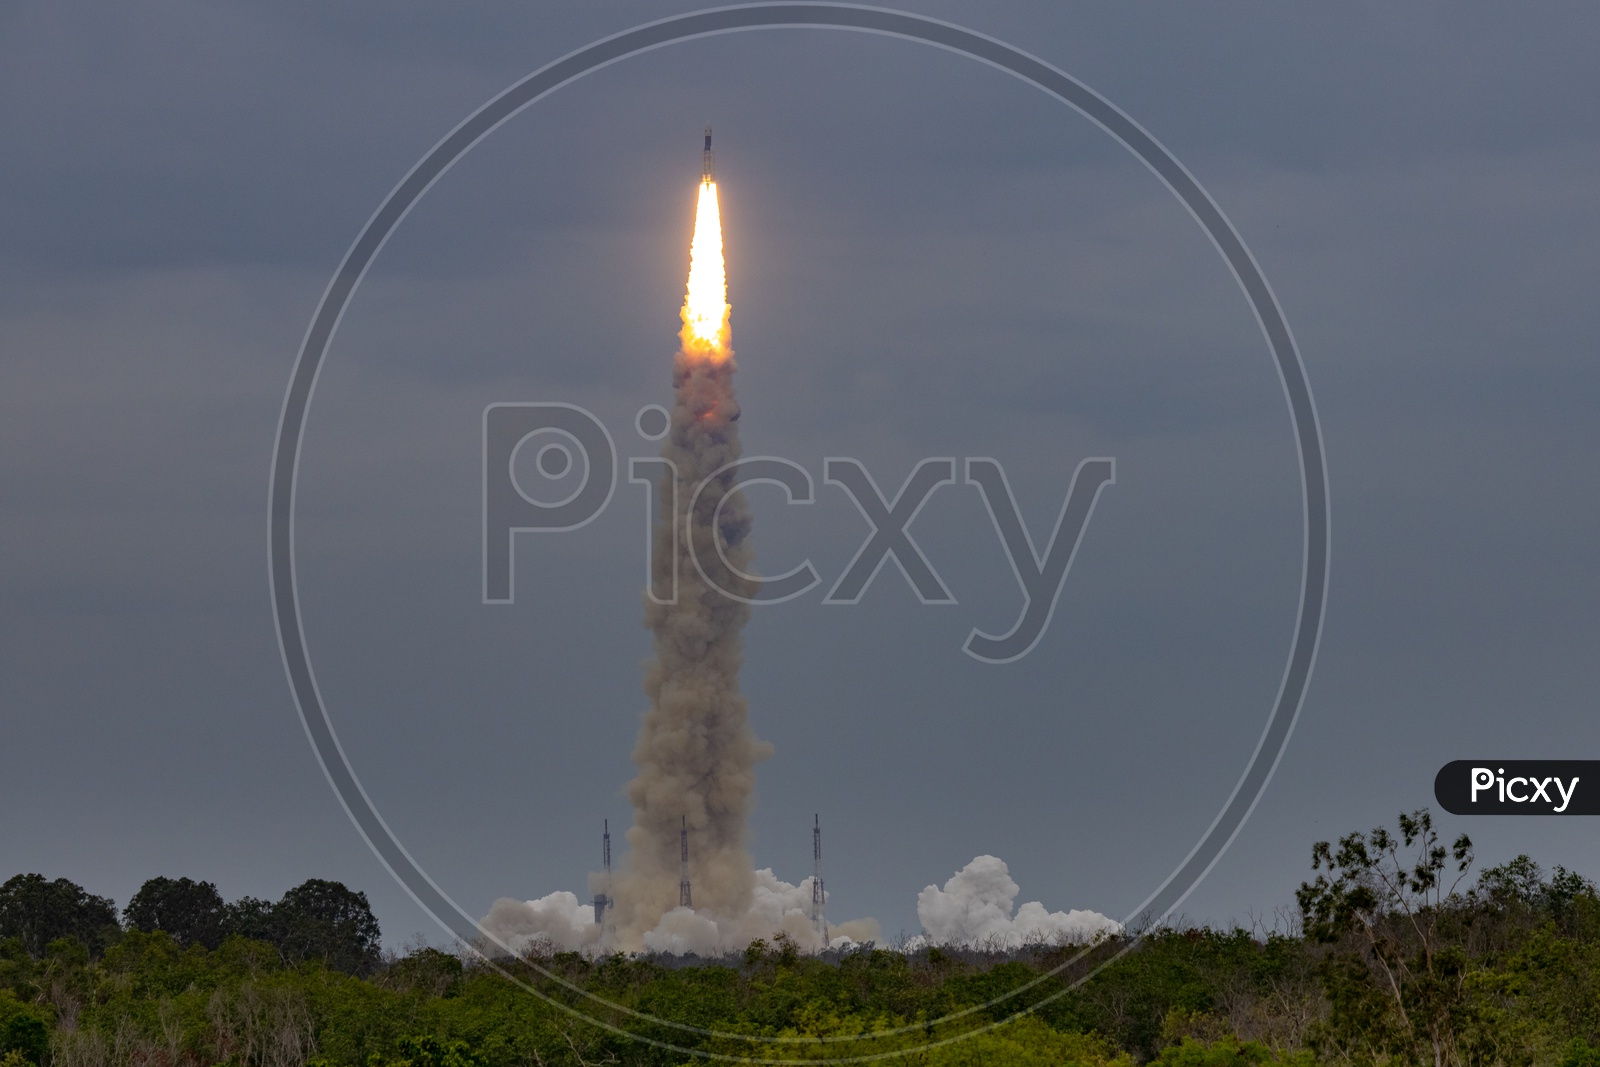 GSLV Mk III  M1  Or Chandrayaan 2  Spacecraft or Rocket  Takeoff From Launch pad  At Satish Dhawan Space Centre  SHAR In Sriharikota